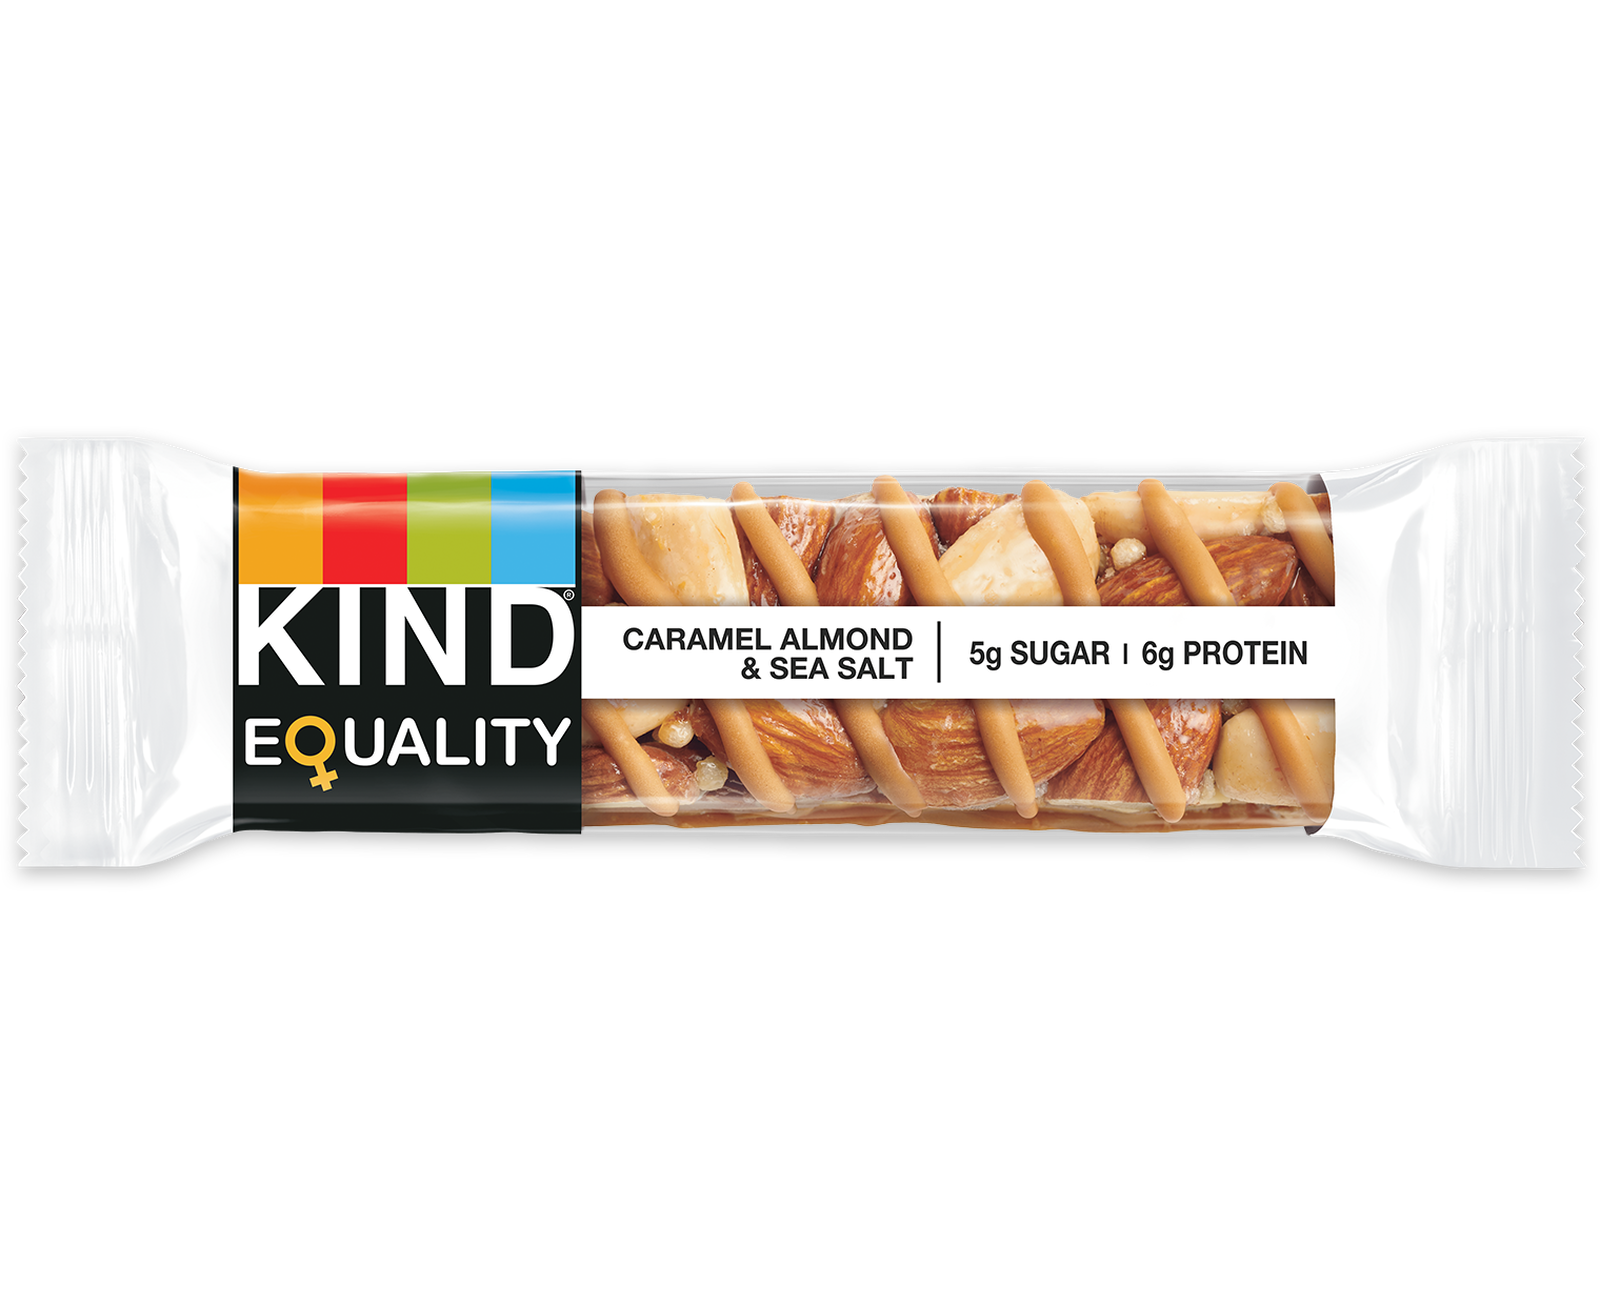 KIND announces commitment to support racial equality